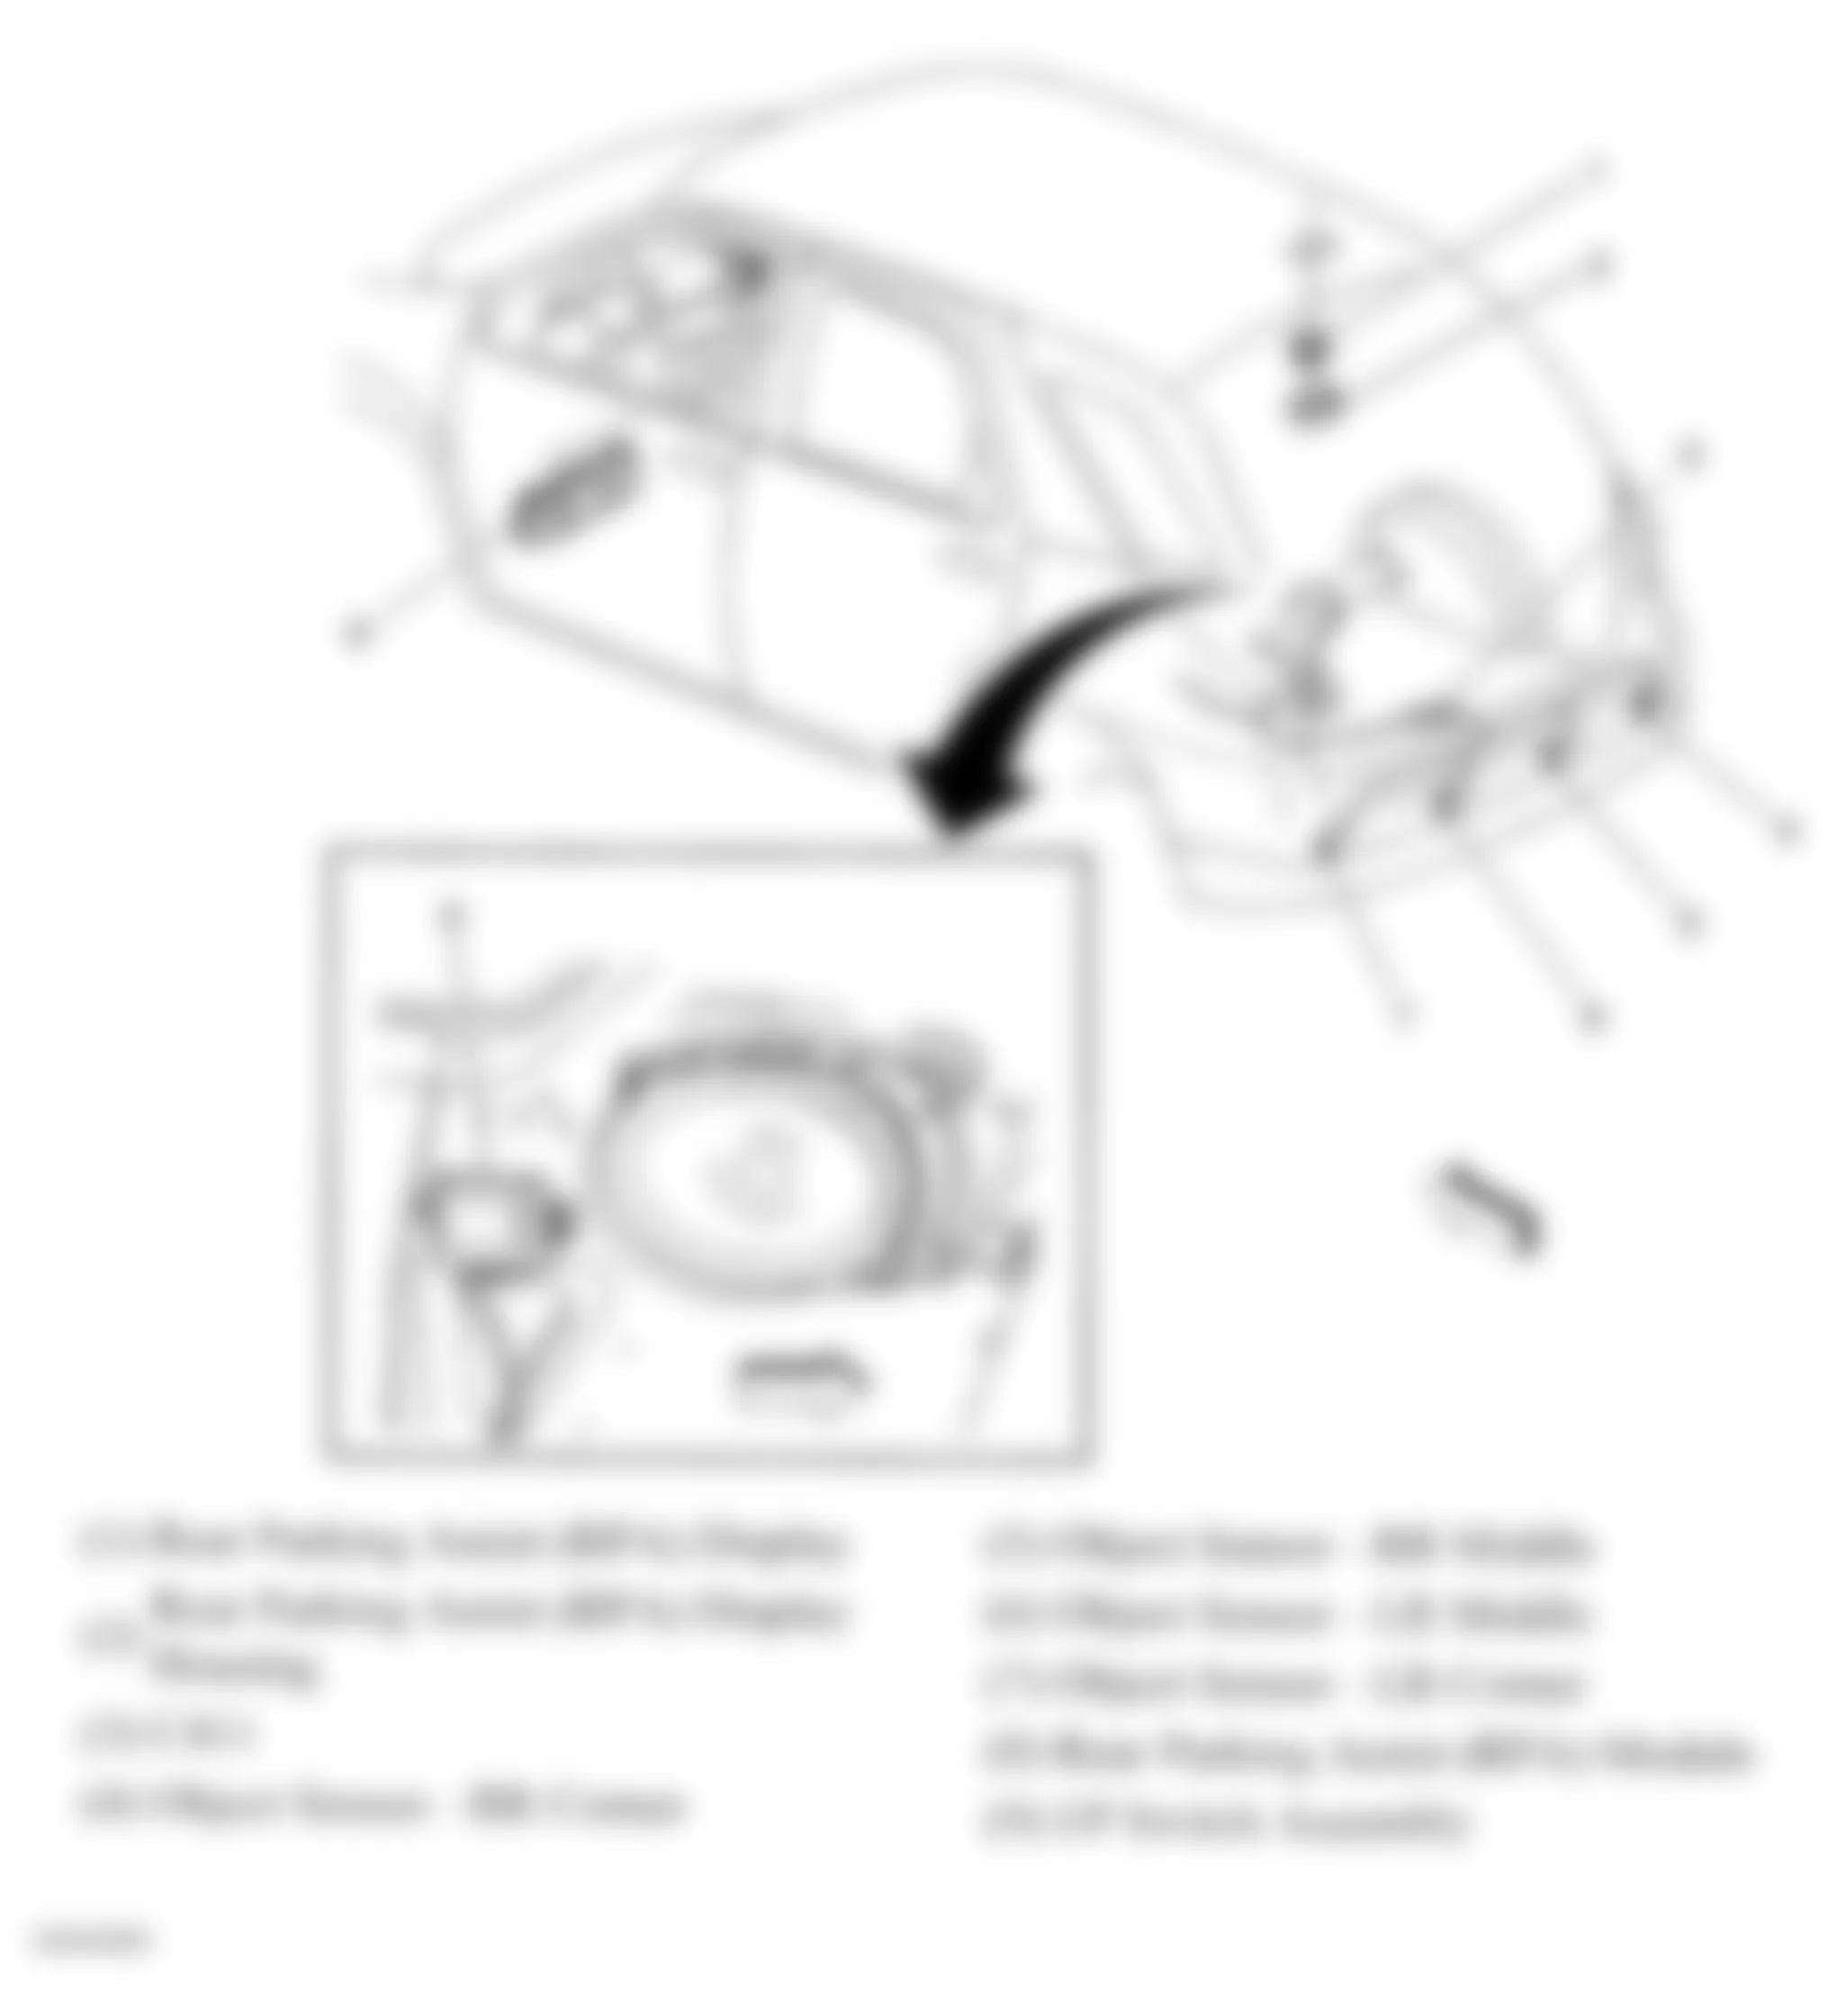 Buick Rendezvous CXL 2007 - Component Locations -  Rear Parking Assistant (RPA) Subsystem